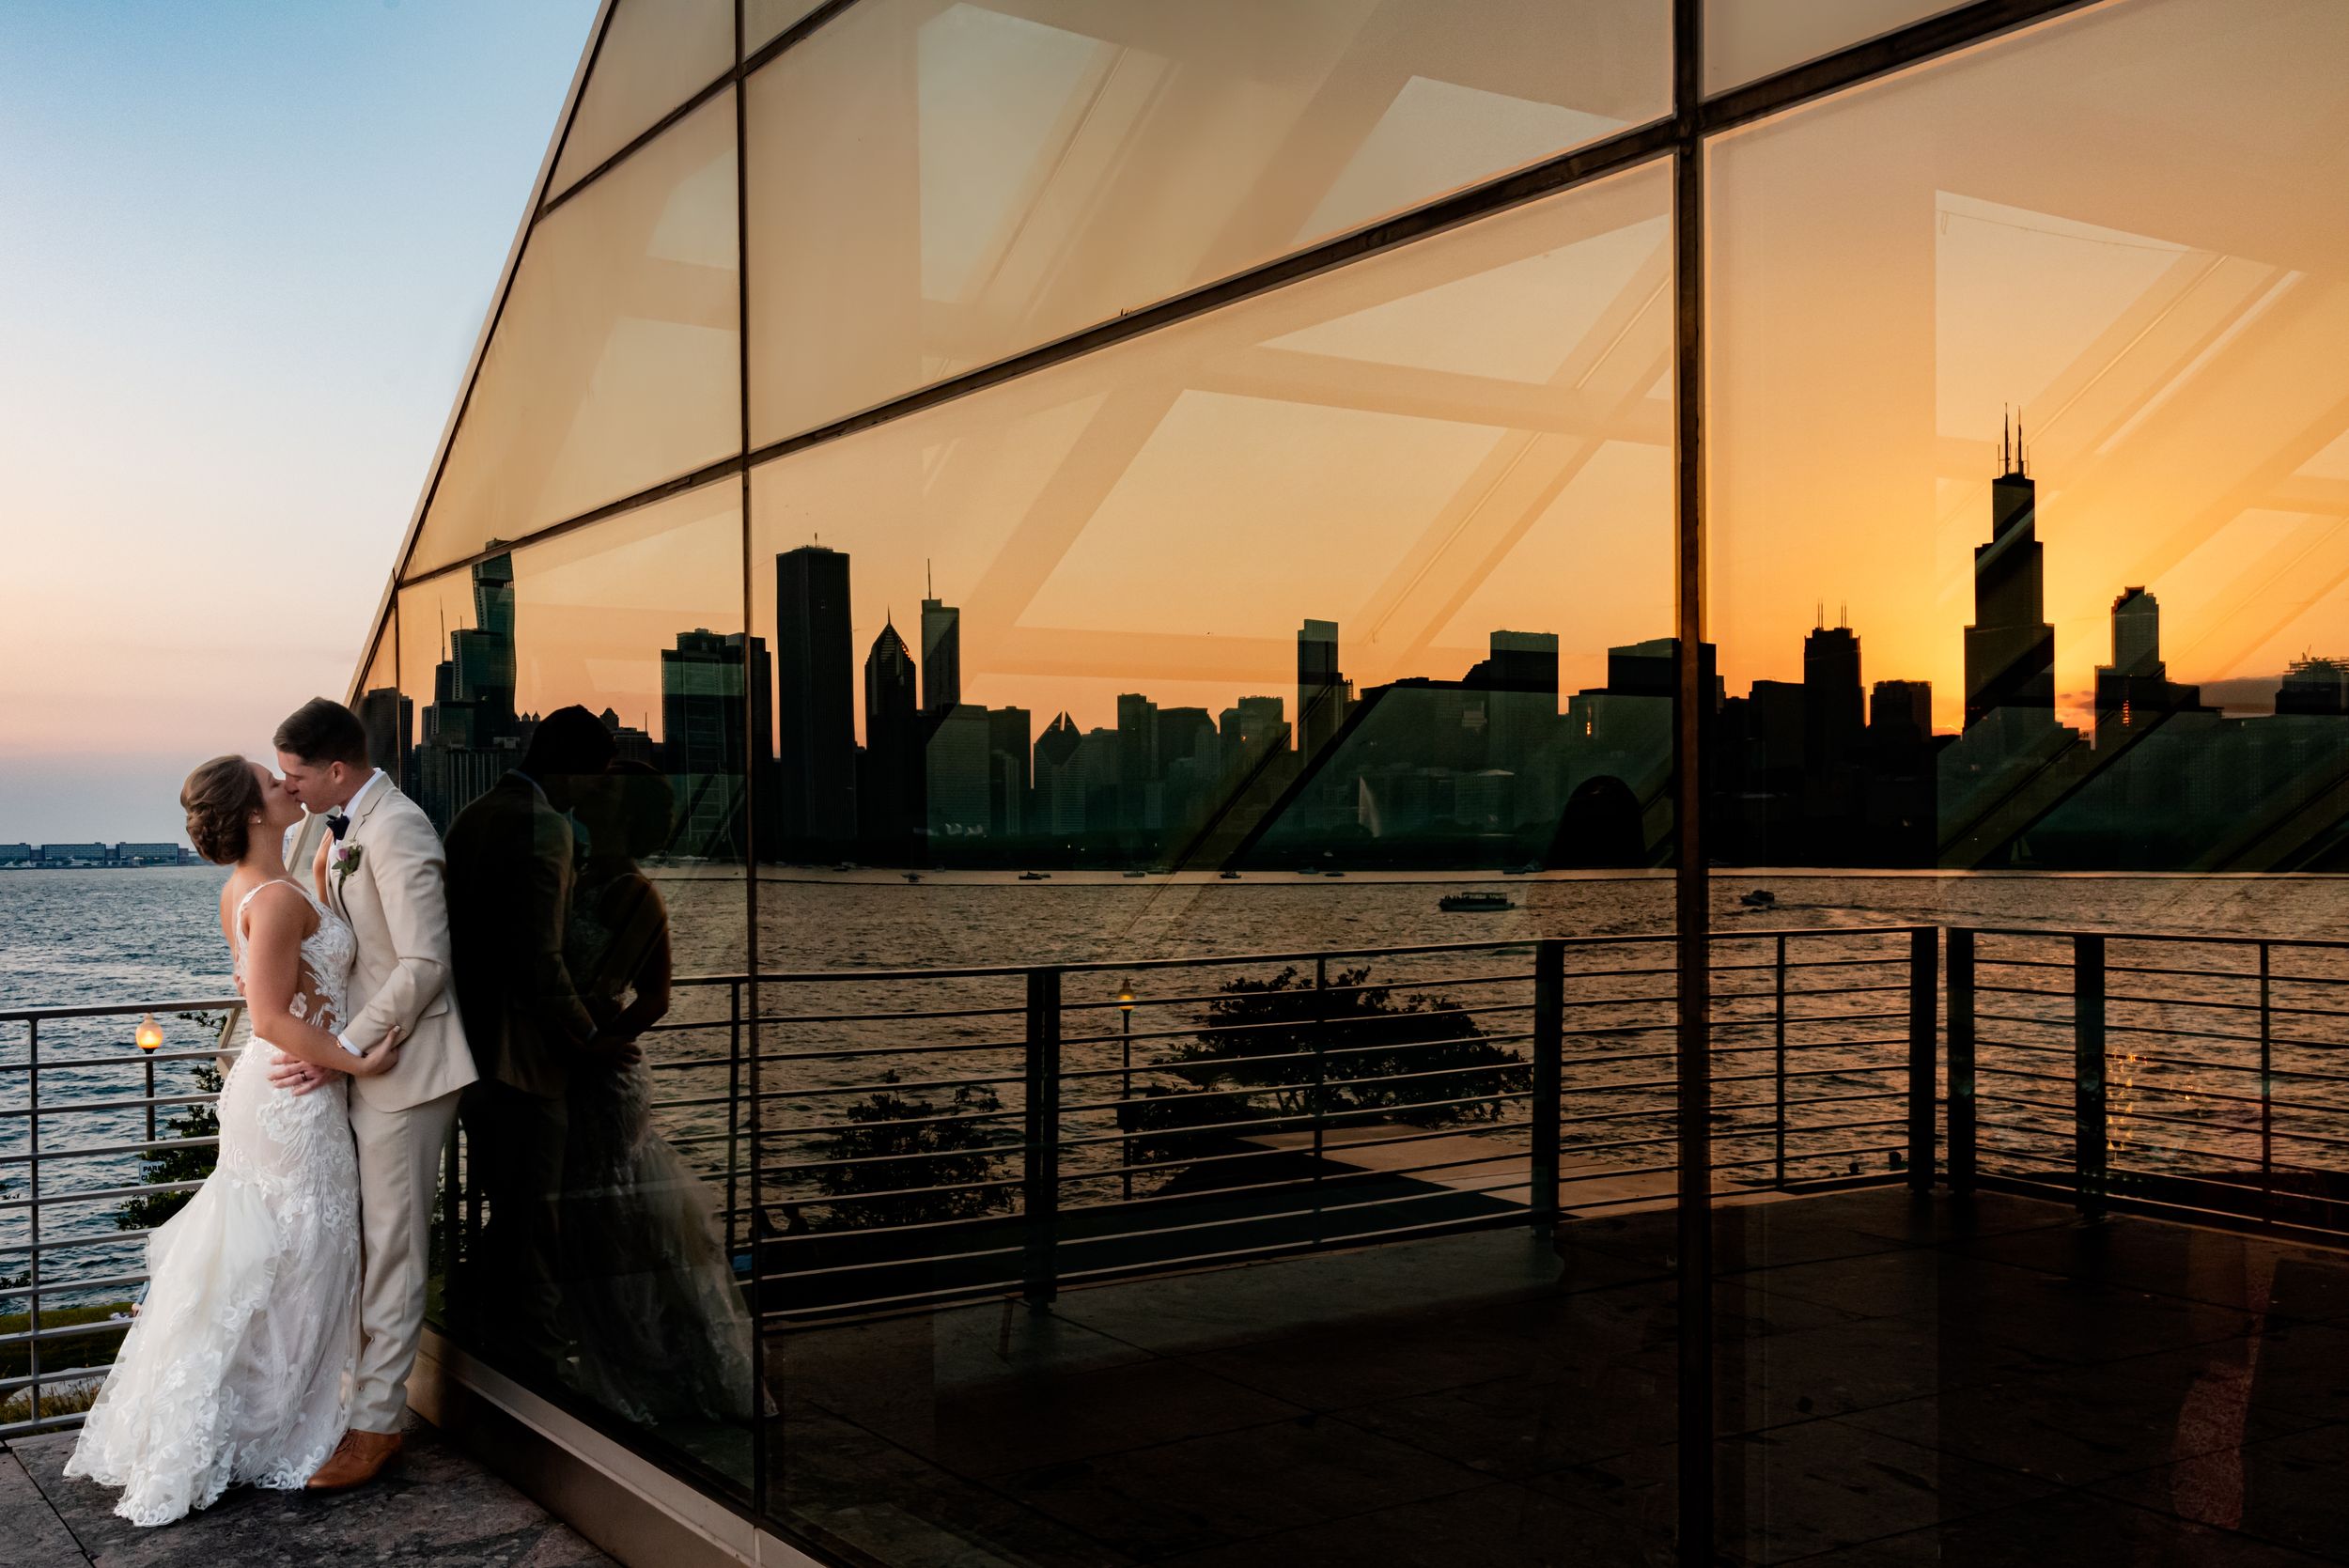 Bride and Groom portrait at the Chicago adler planetarium with the chicago skyline at sunset